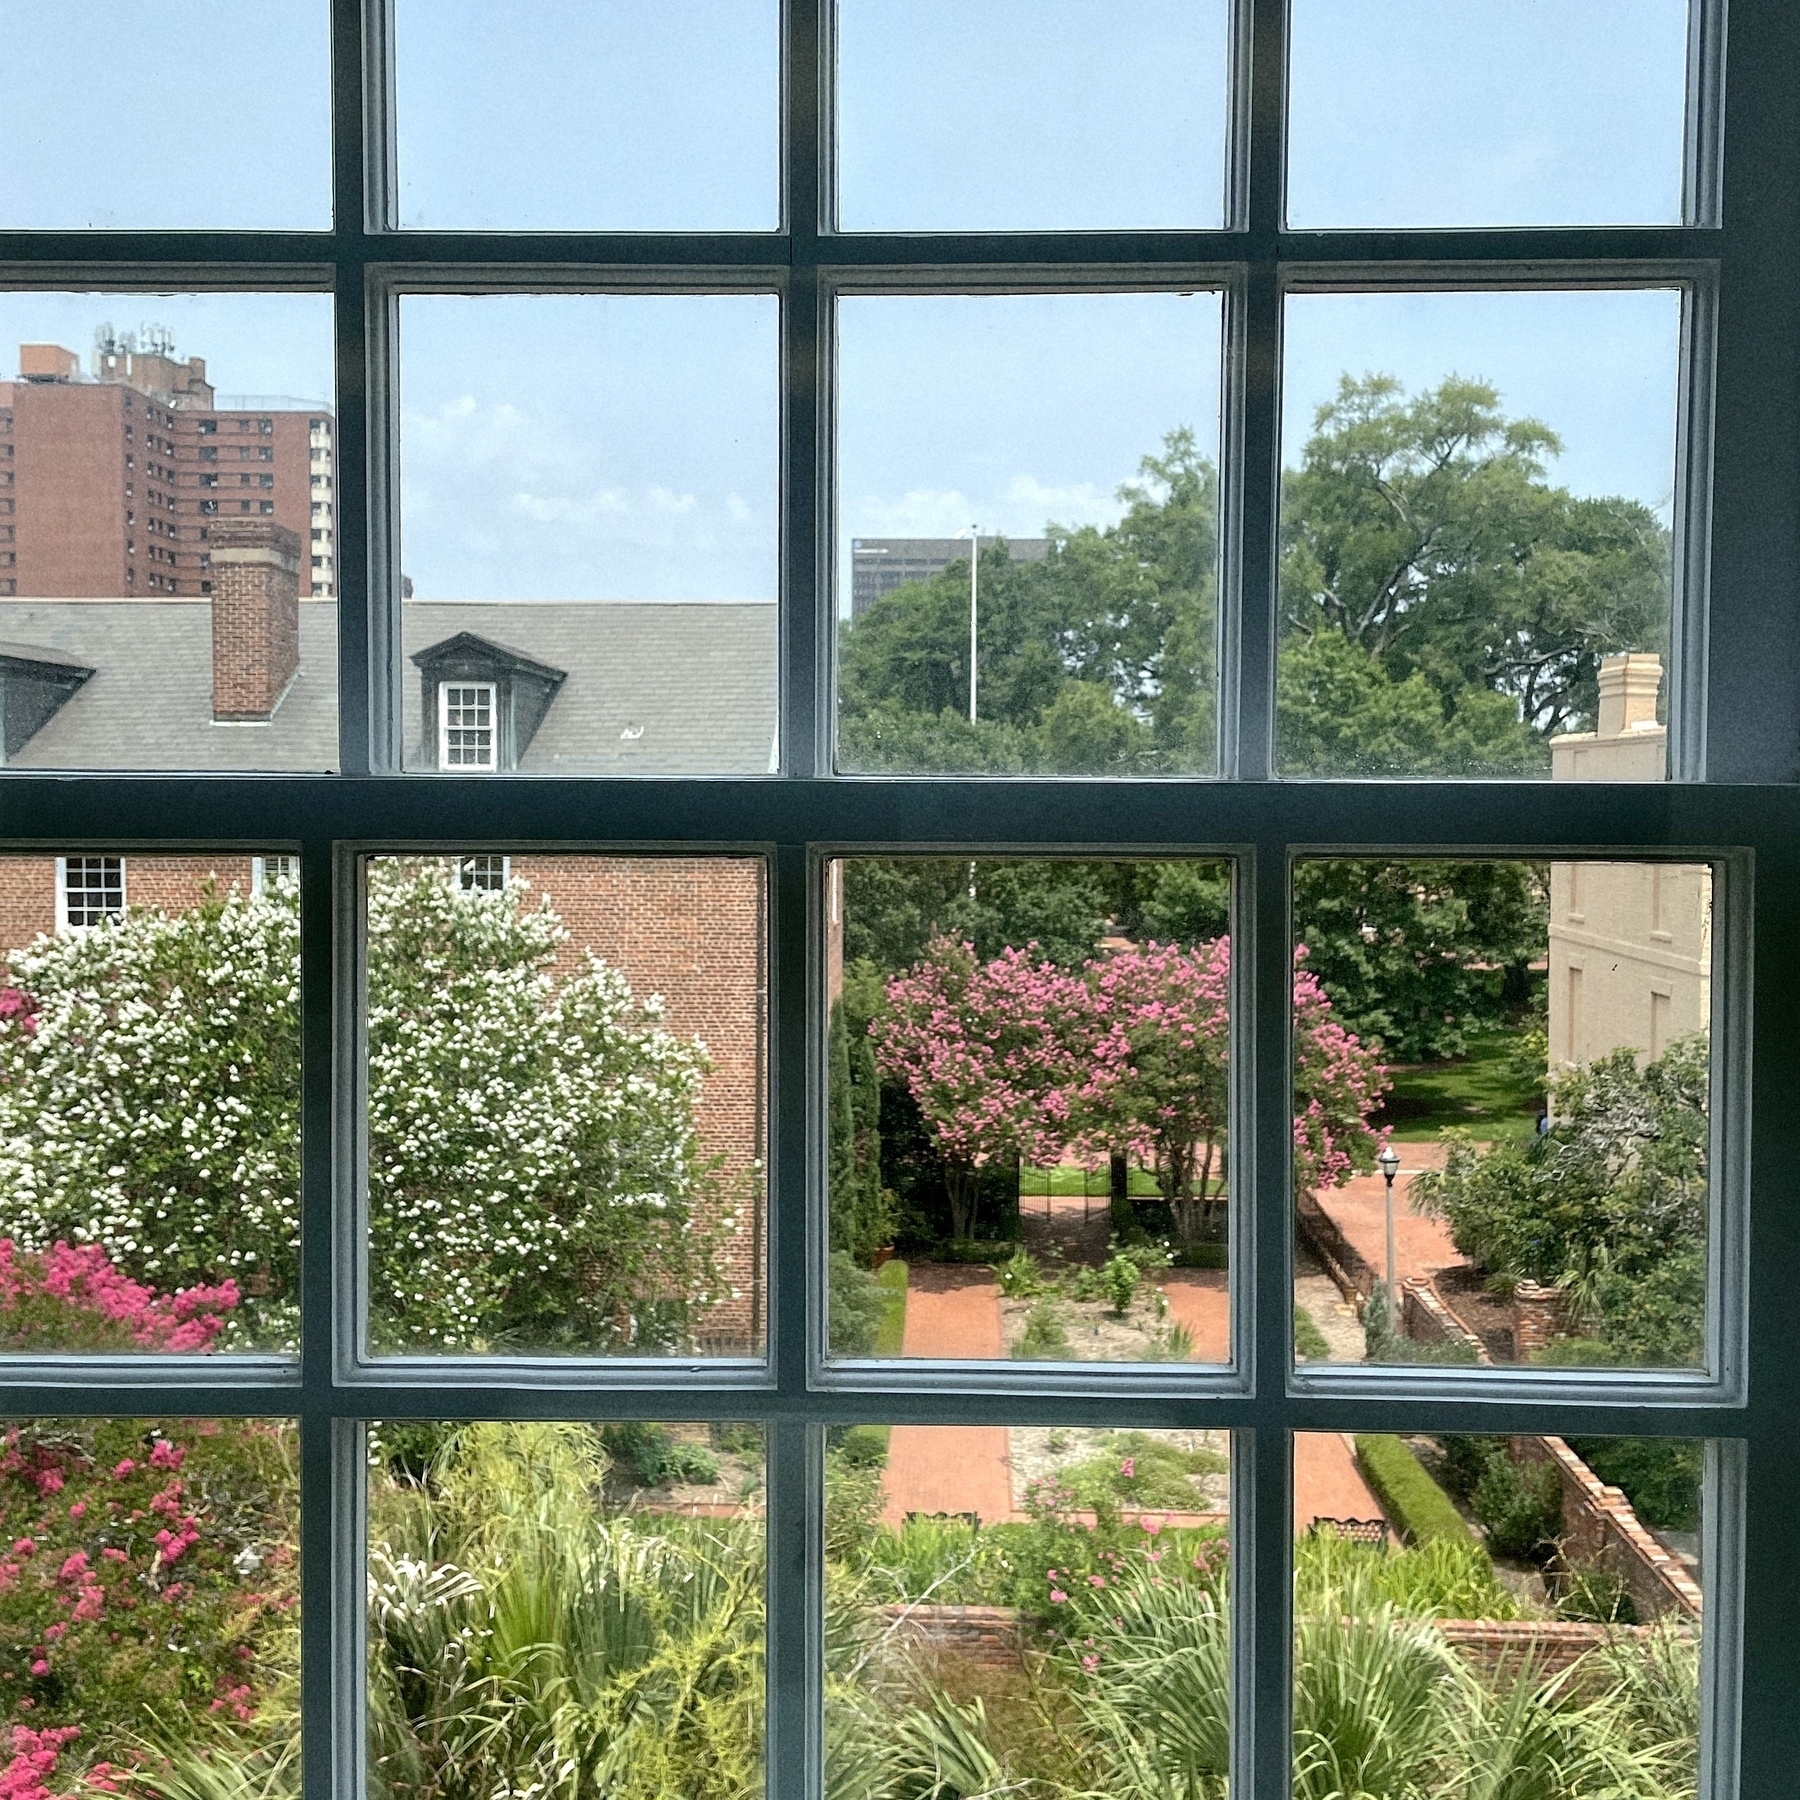 A view out a window of the rose garden at the University of South Carolina. 